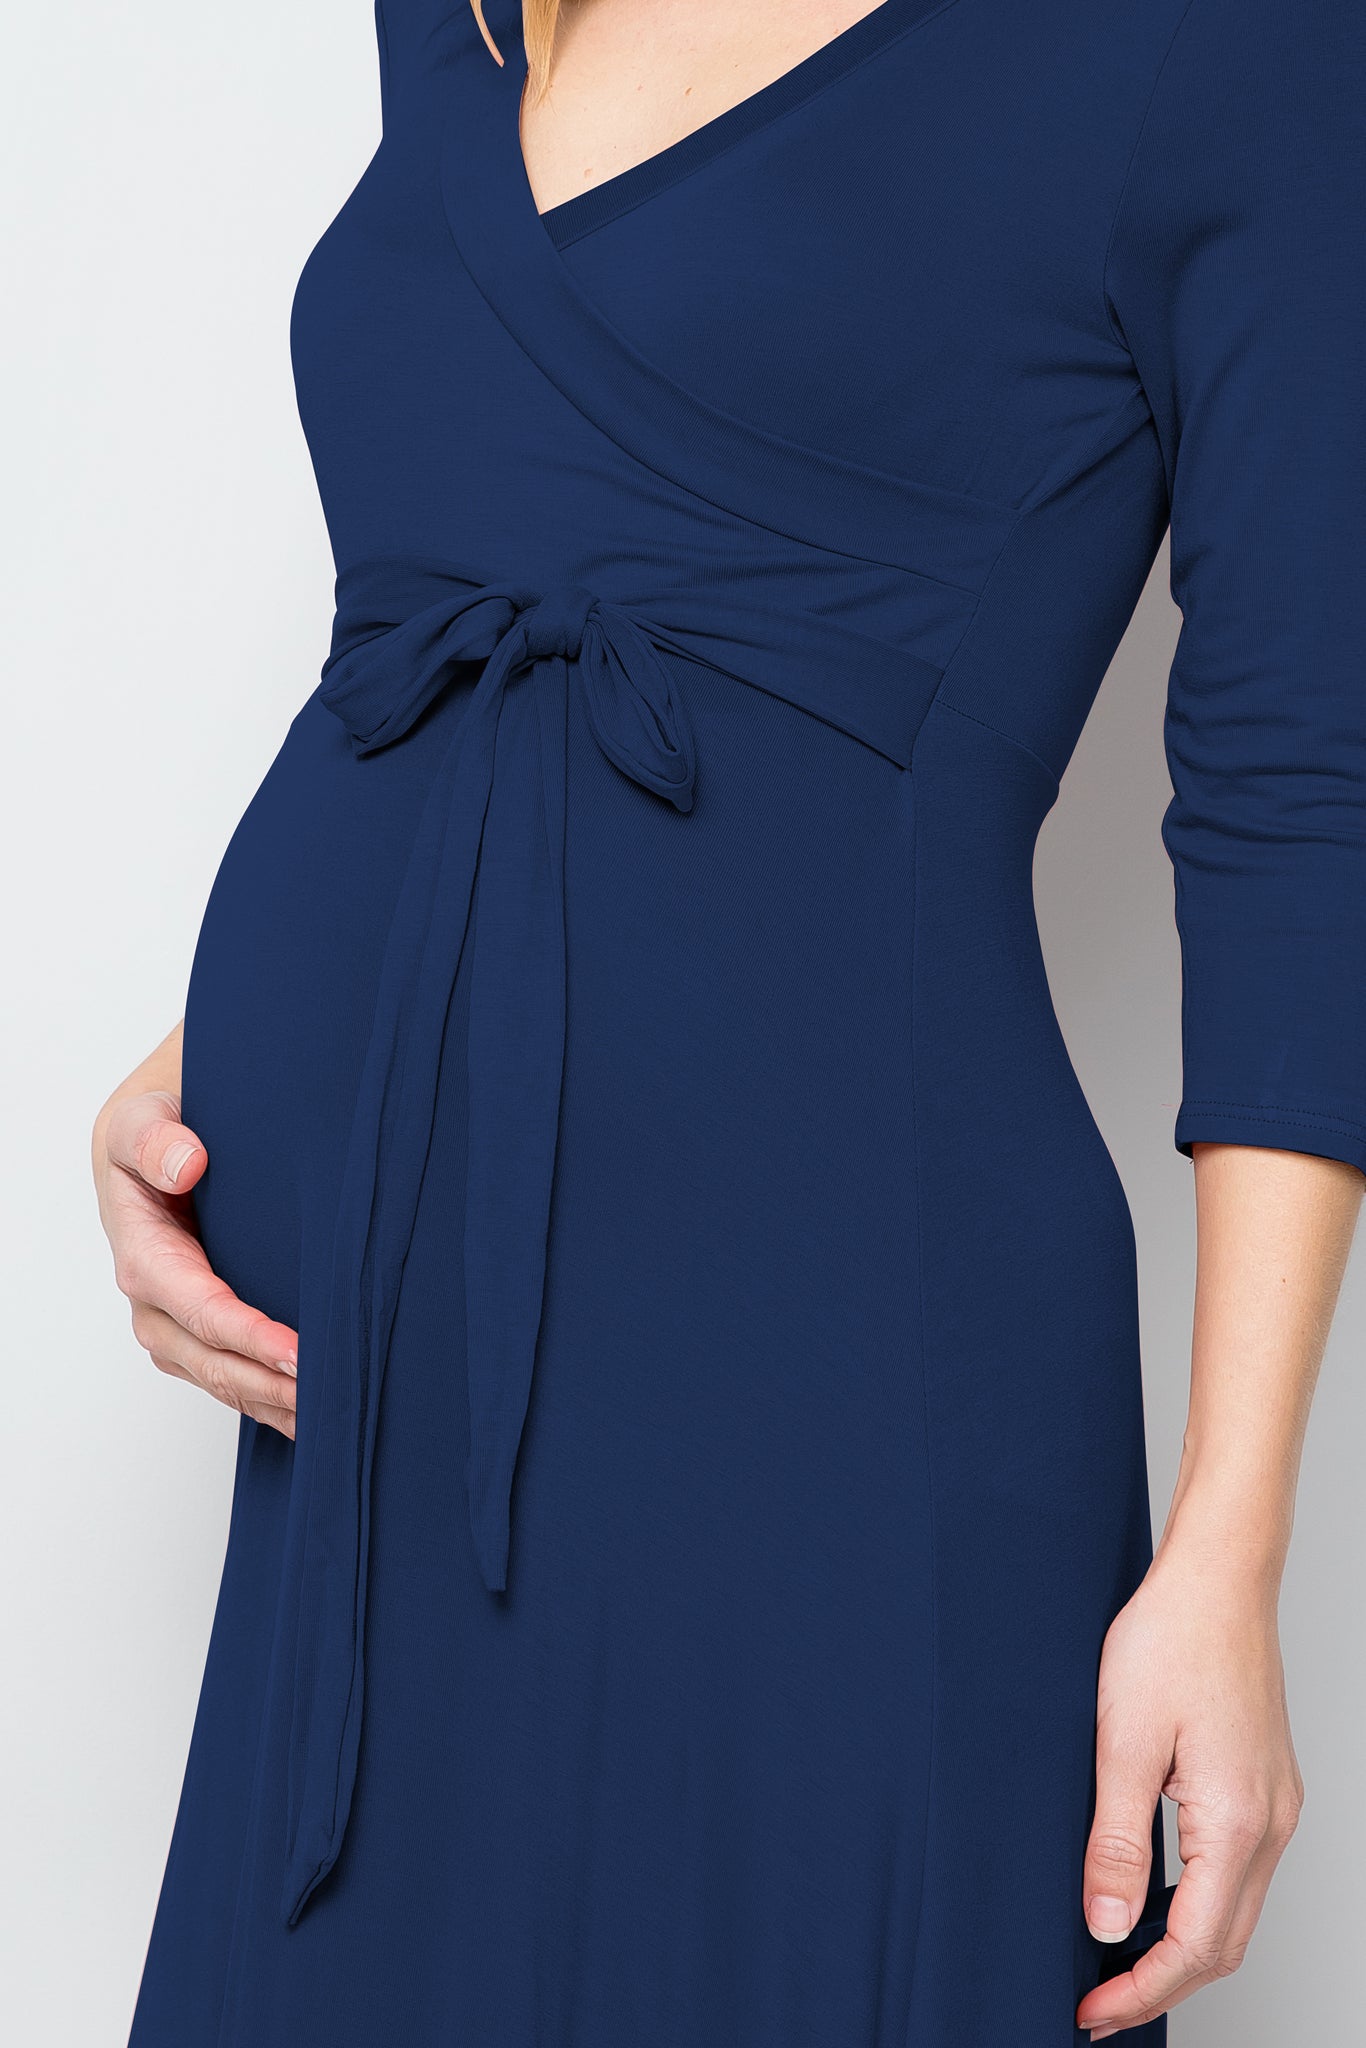 maternity pregnancy baby shower relaxed quarter sleeve surplice spring summer cocktail maxi dress